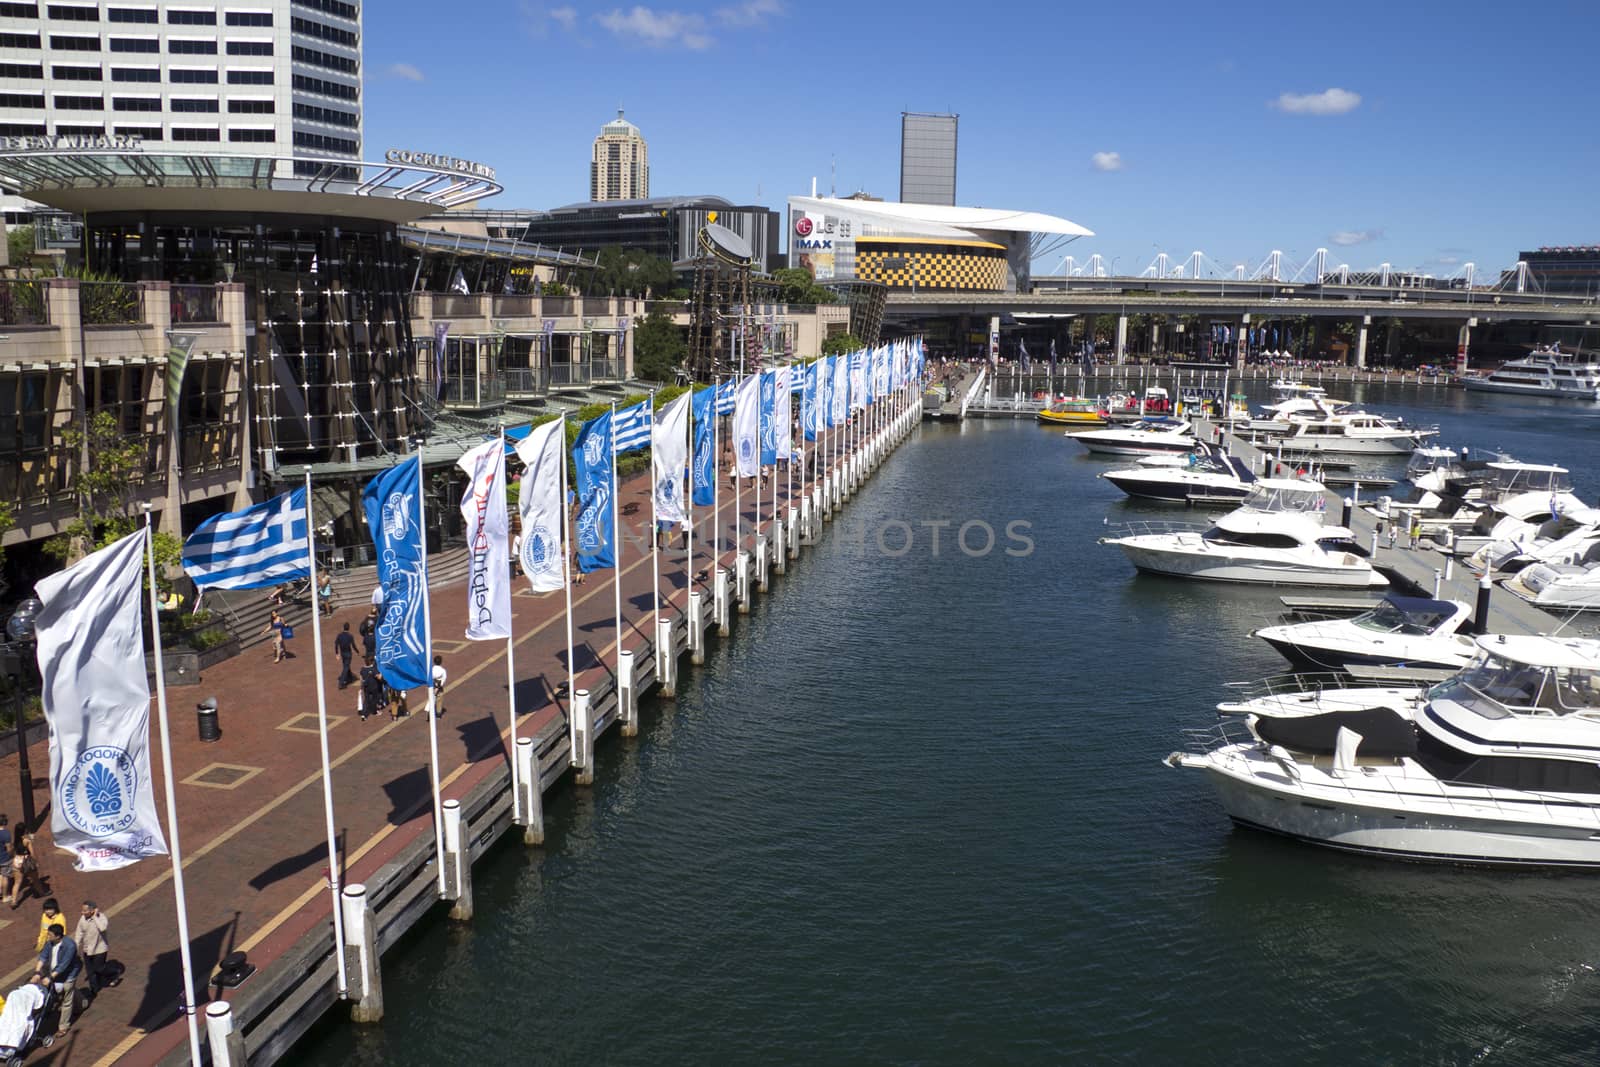 Sydney, Australia-March 17th 2013: Boats moored in the marina at Darling Harbour. The harbour is named after Ralph Daring who was Governor of NSW